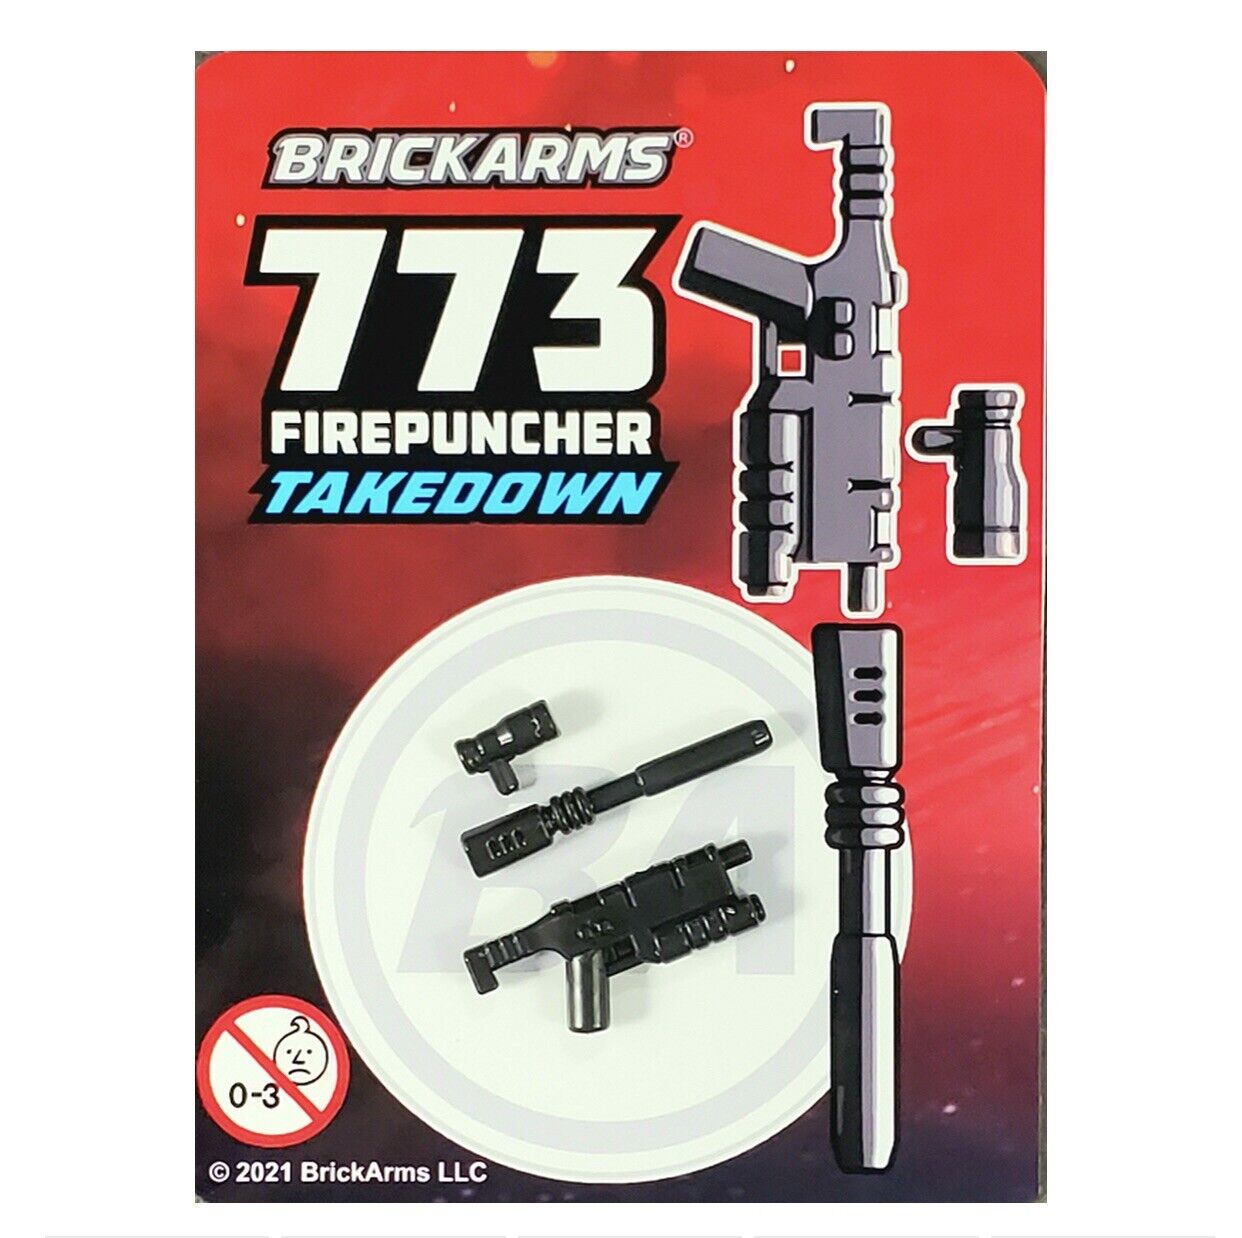 BrickArms 773 Firepuncher Takedown Blaster Rifle Weapons for Brick Minifigures